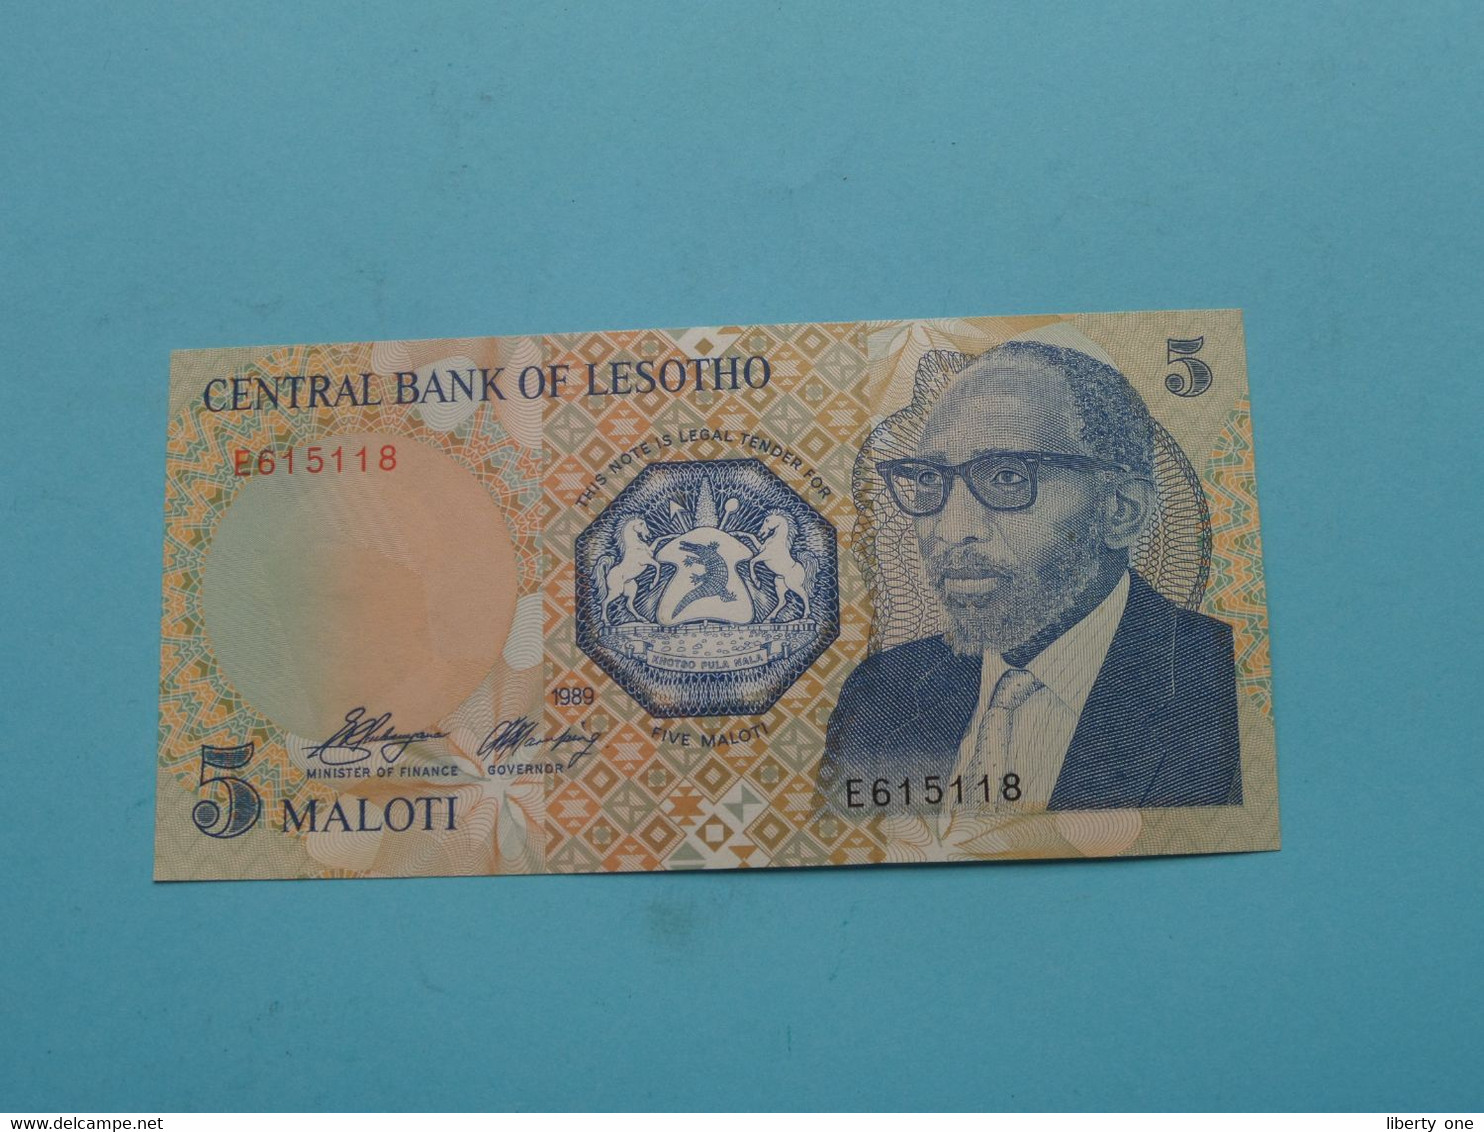 5 Maloti ( E615118 ) Central Bank Of LESOTHO - 1989 ( For Grade See SCANS ) UNC ! - Lesoto